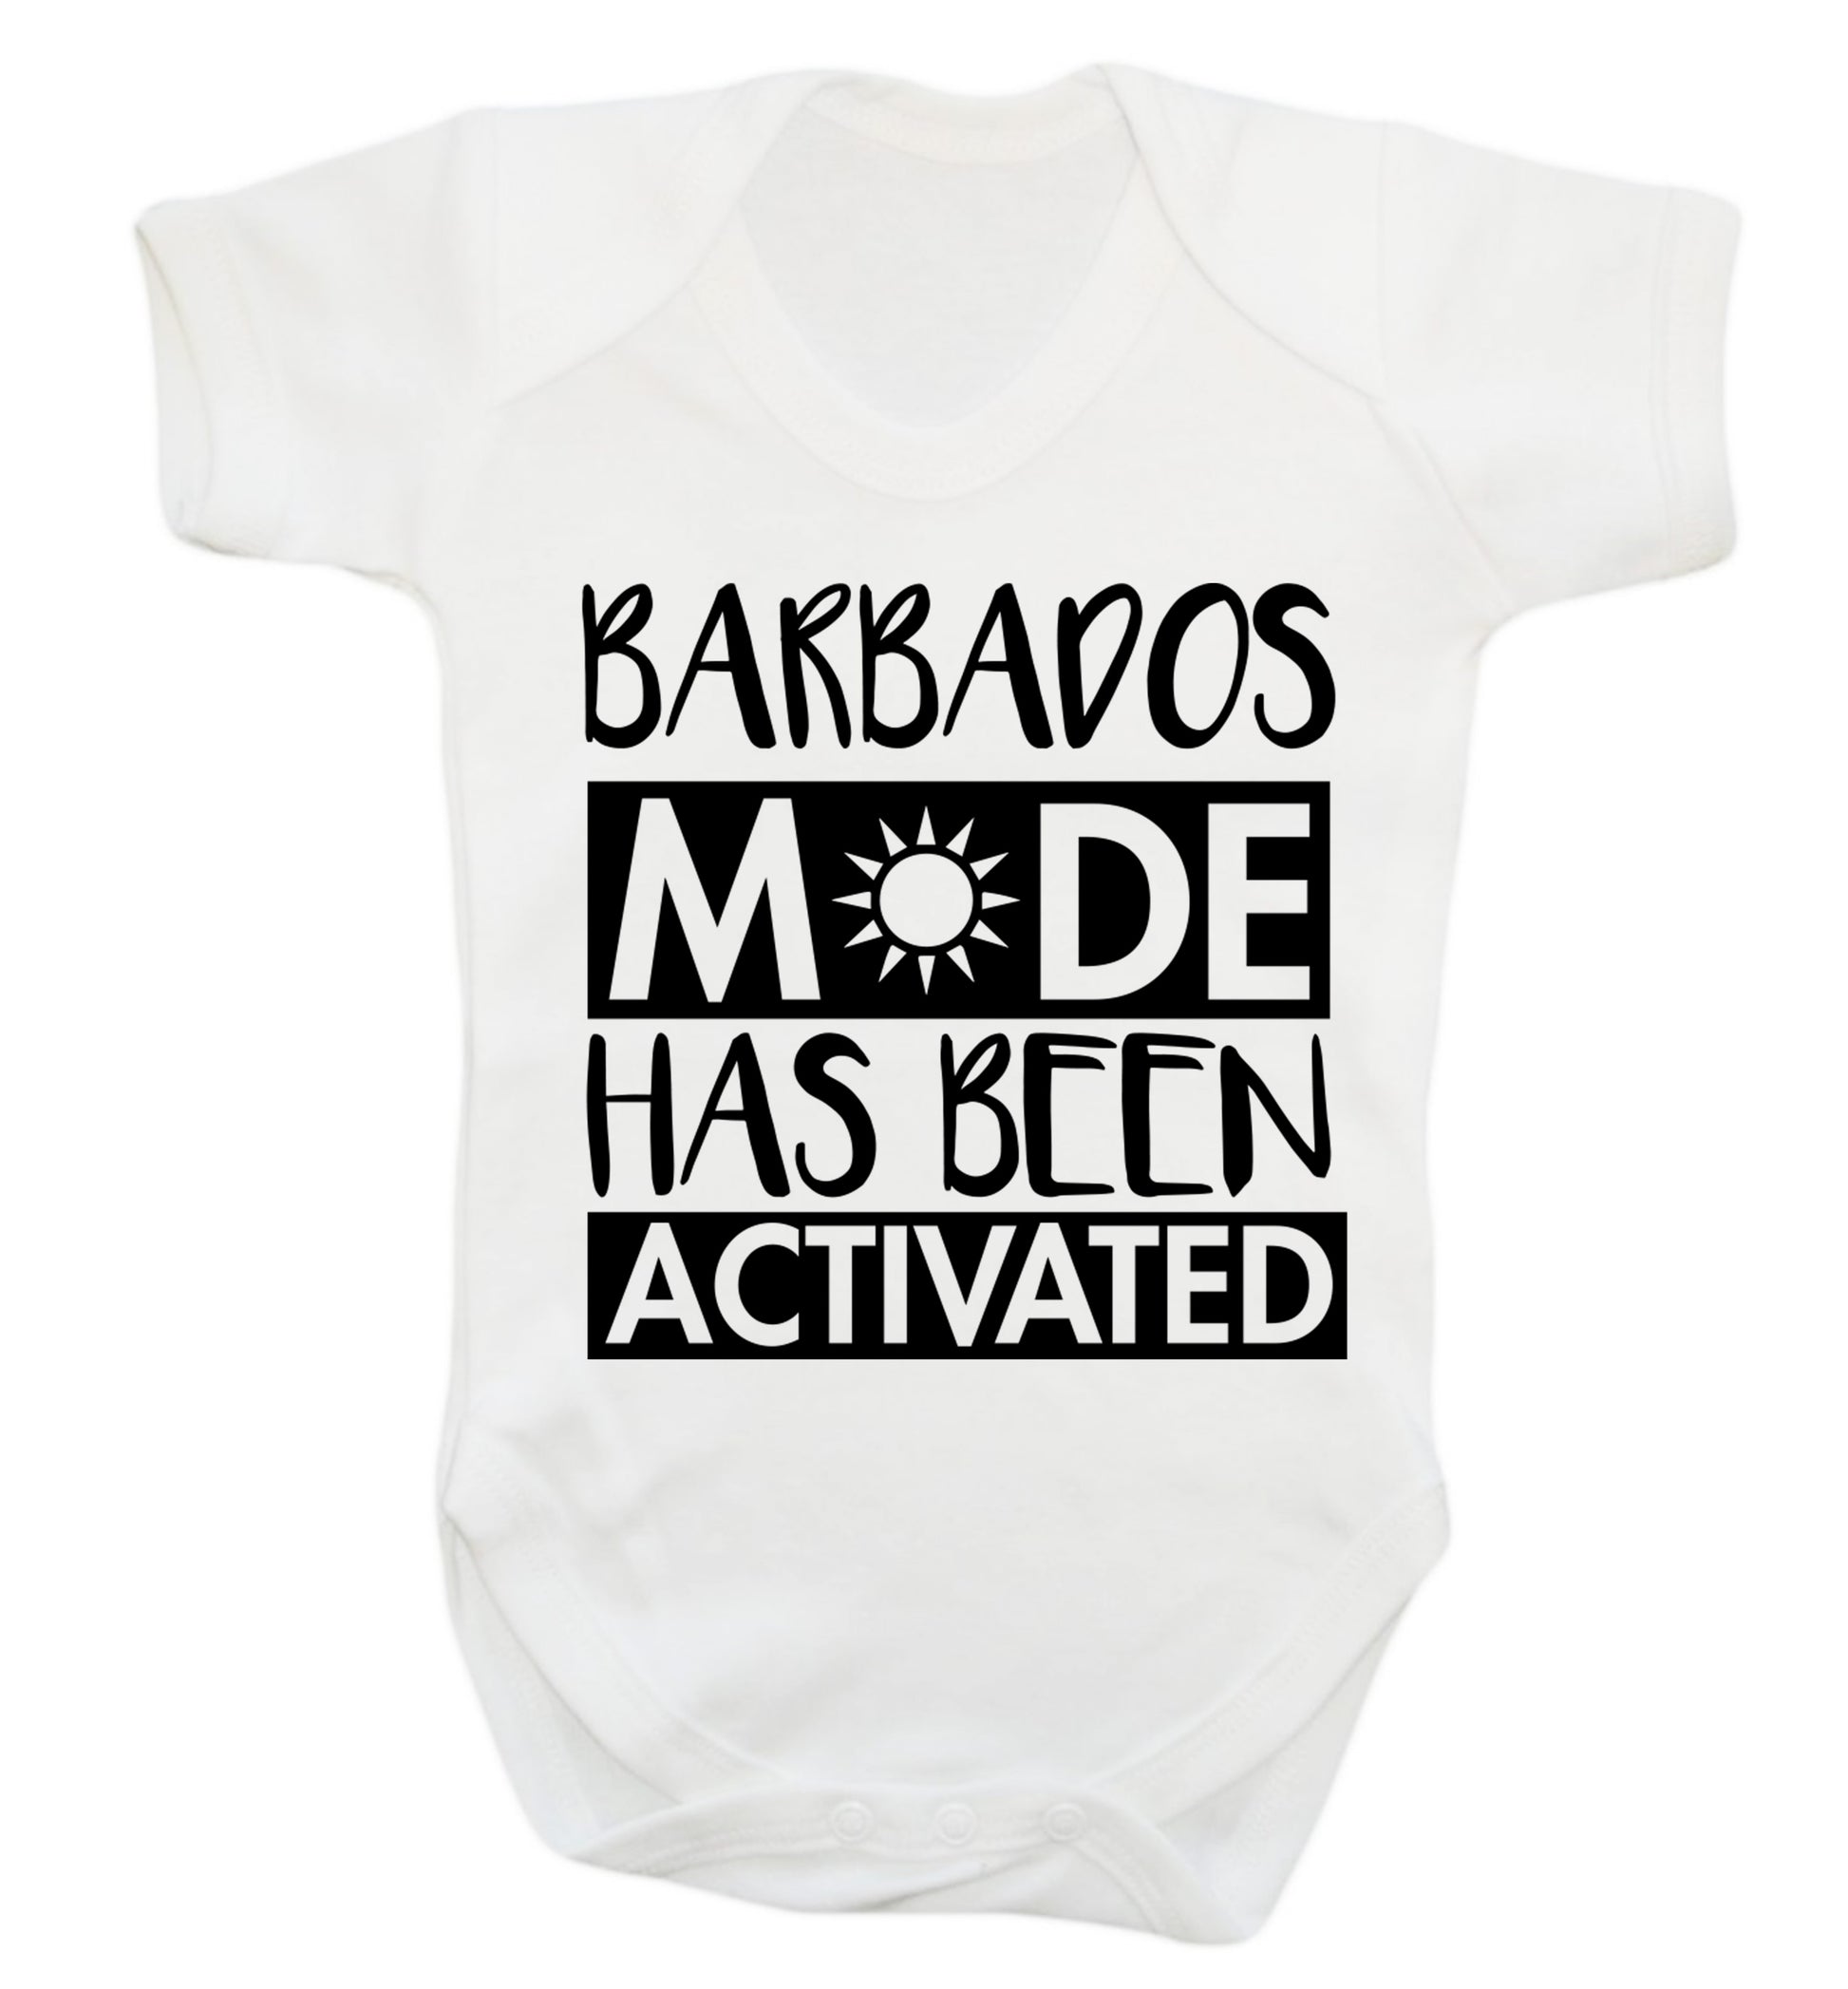 Barbados mode has been activated Baby Vest white 18-24 months